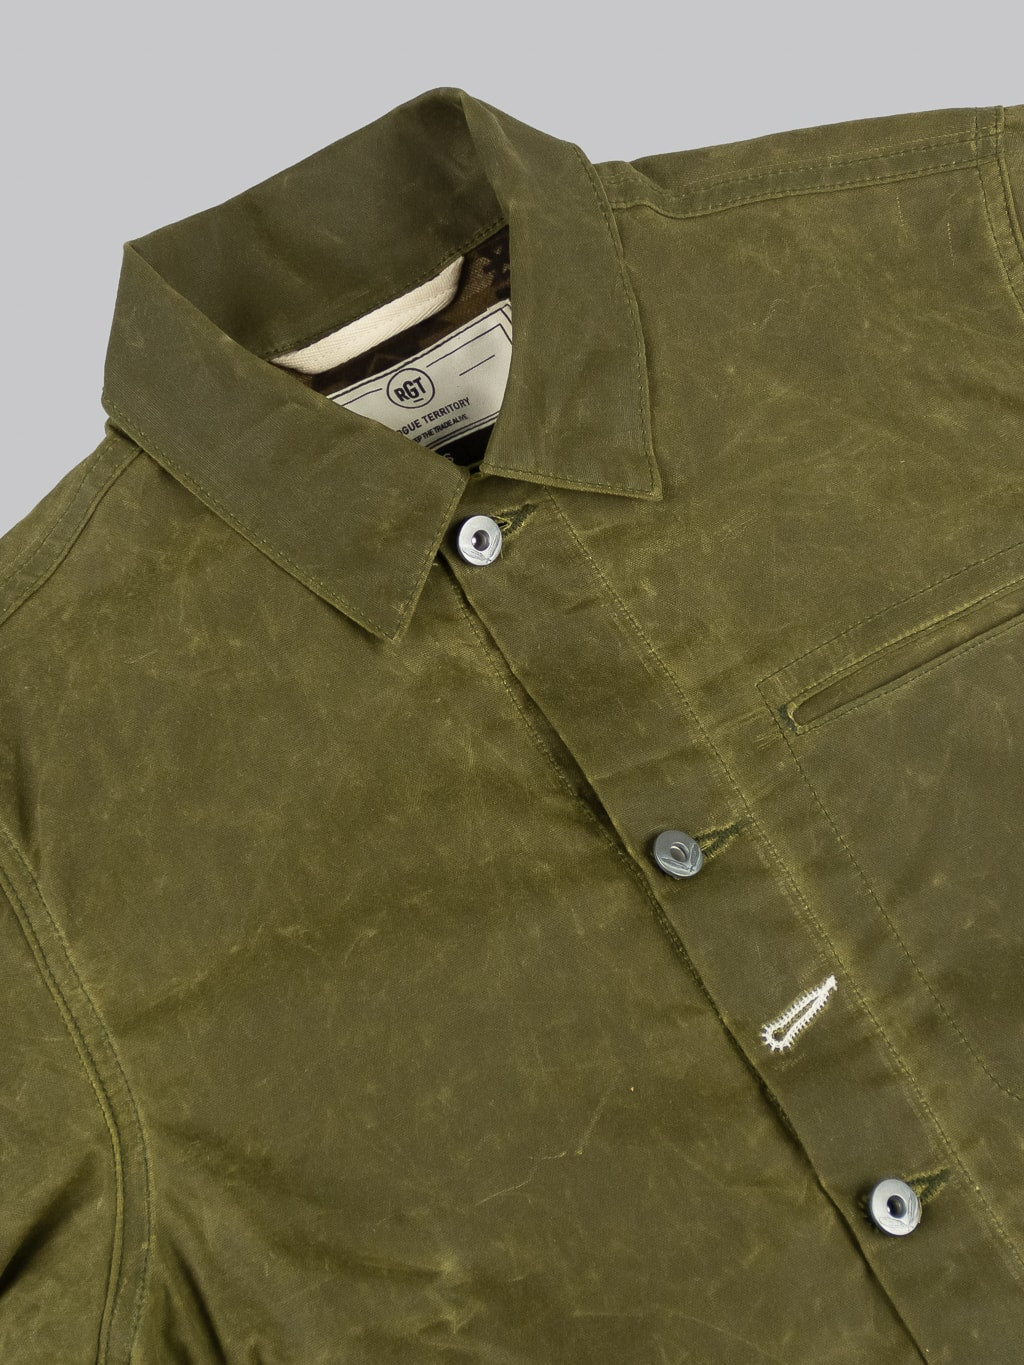 Rogue Territory Supply Jacket Lined Hunter Green Ridgeline chest